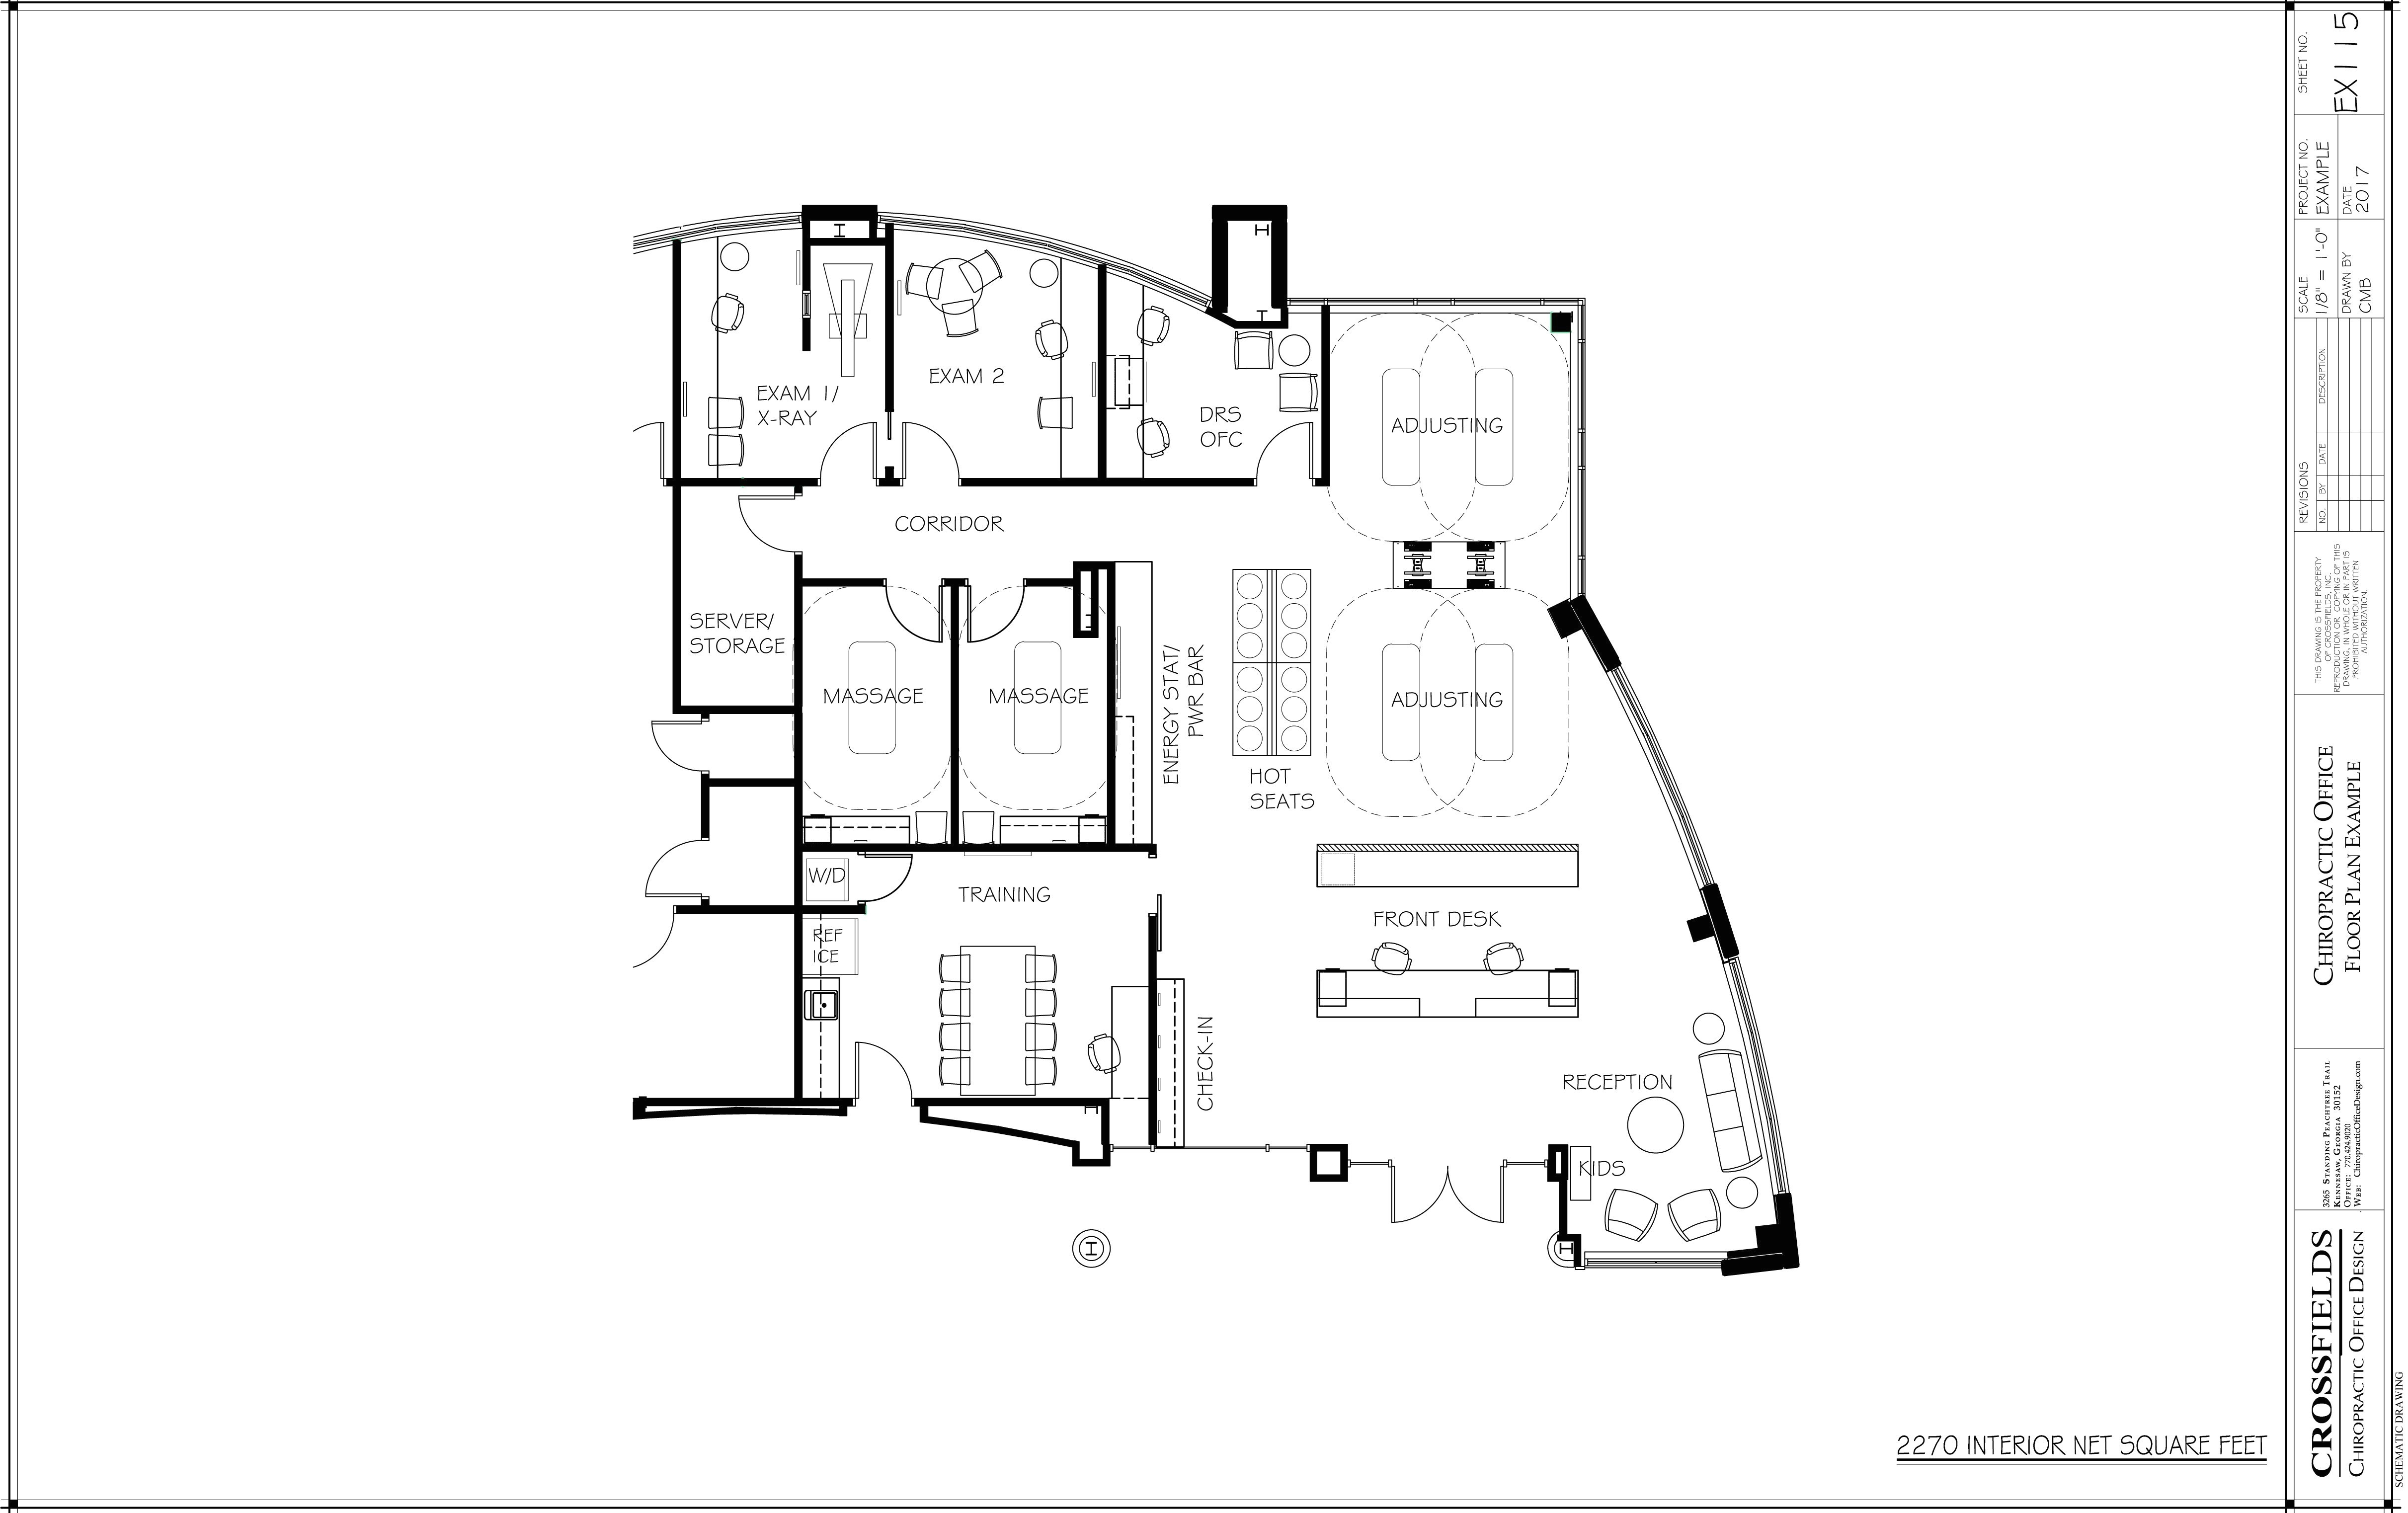 how to draw home addition plans new floor plan best index wiki 0 0d